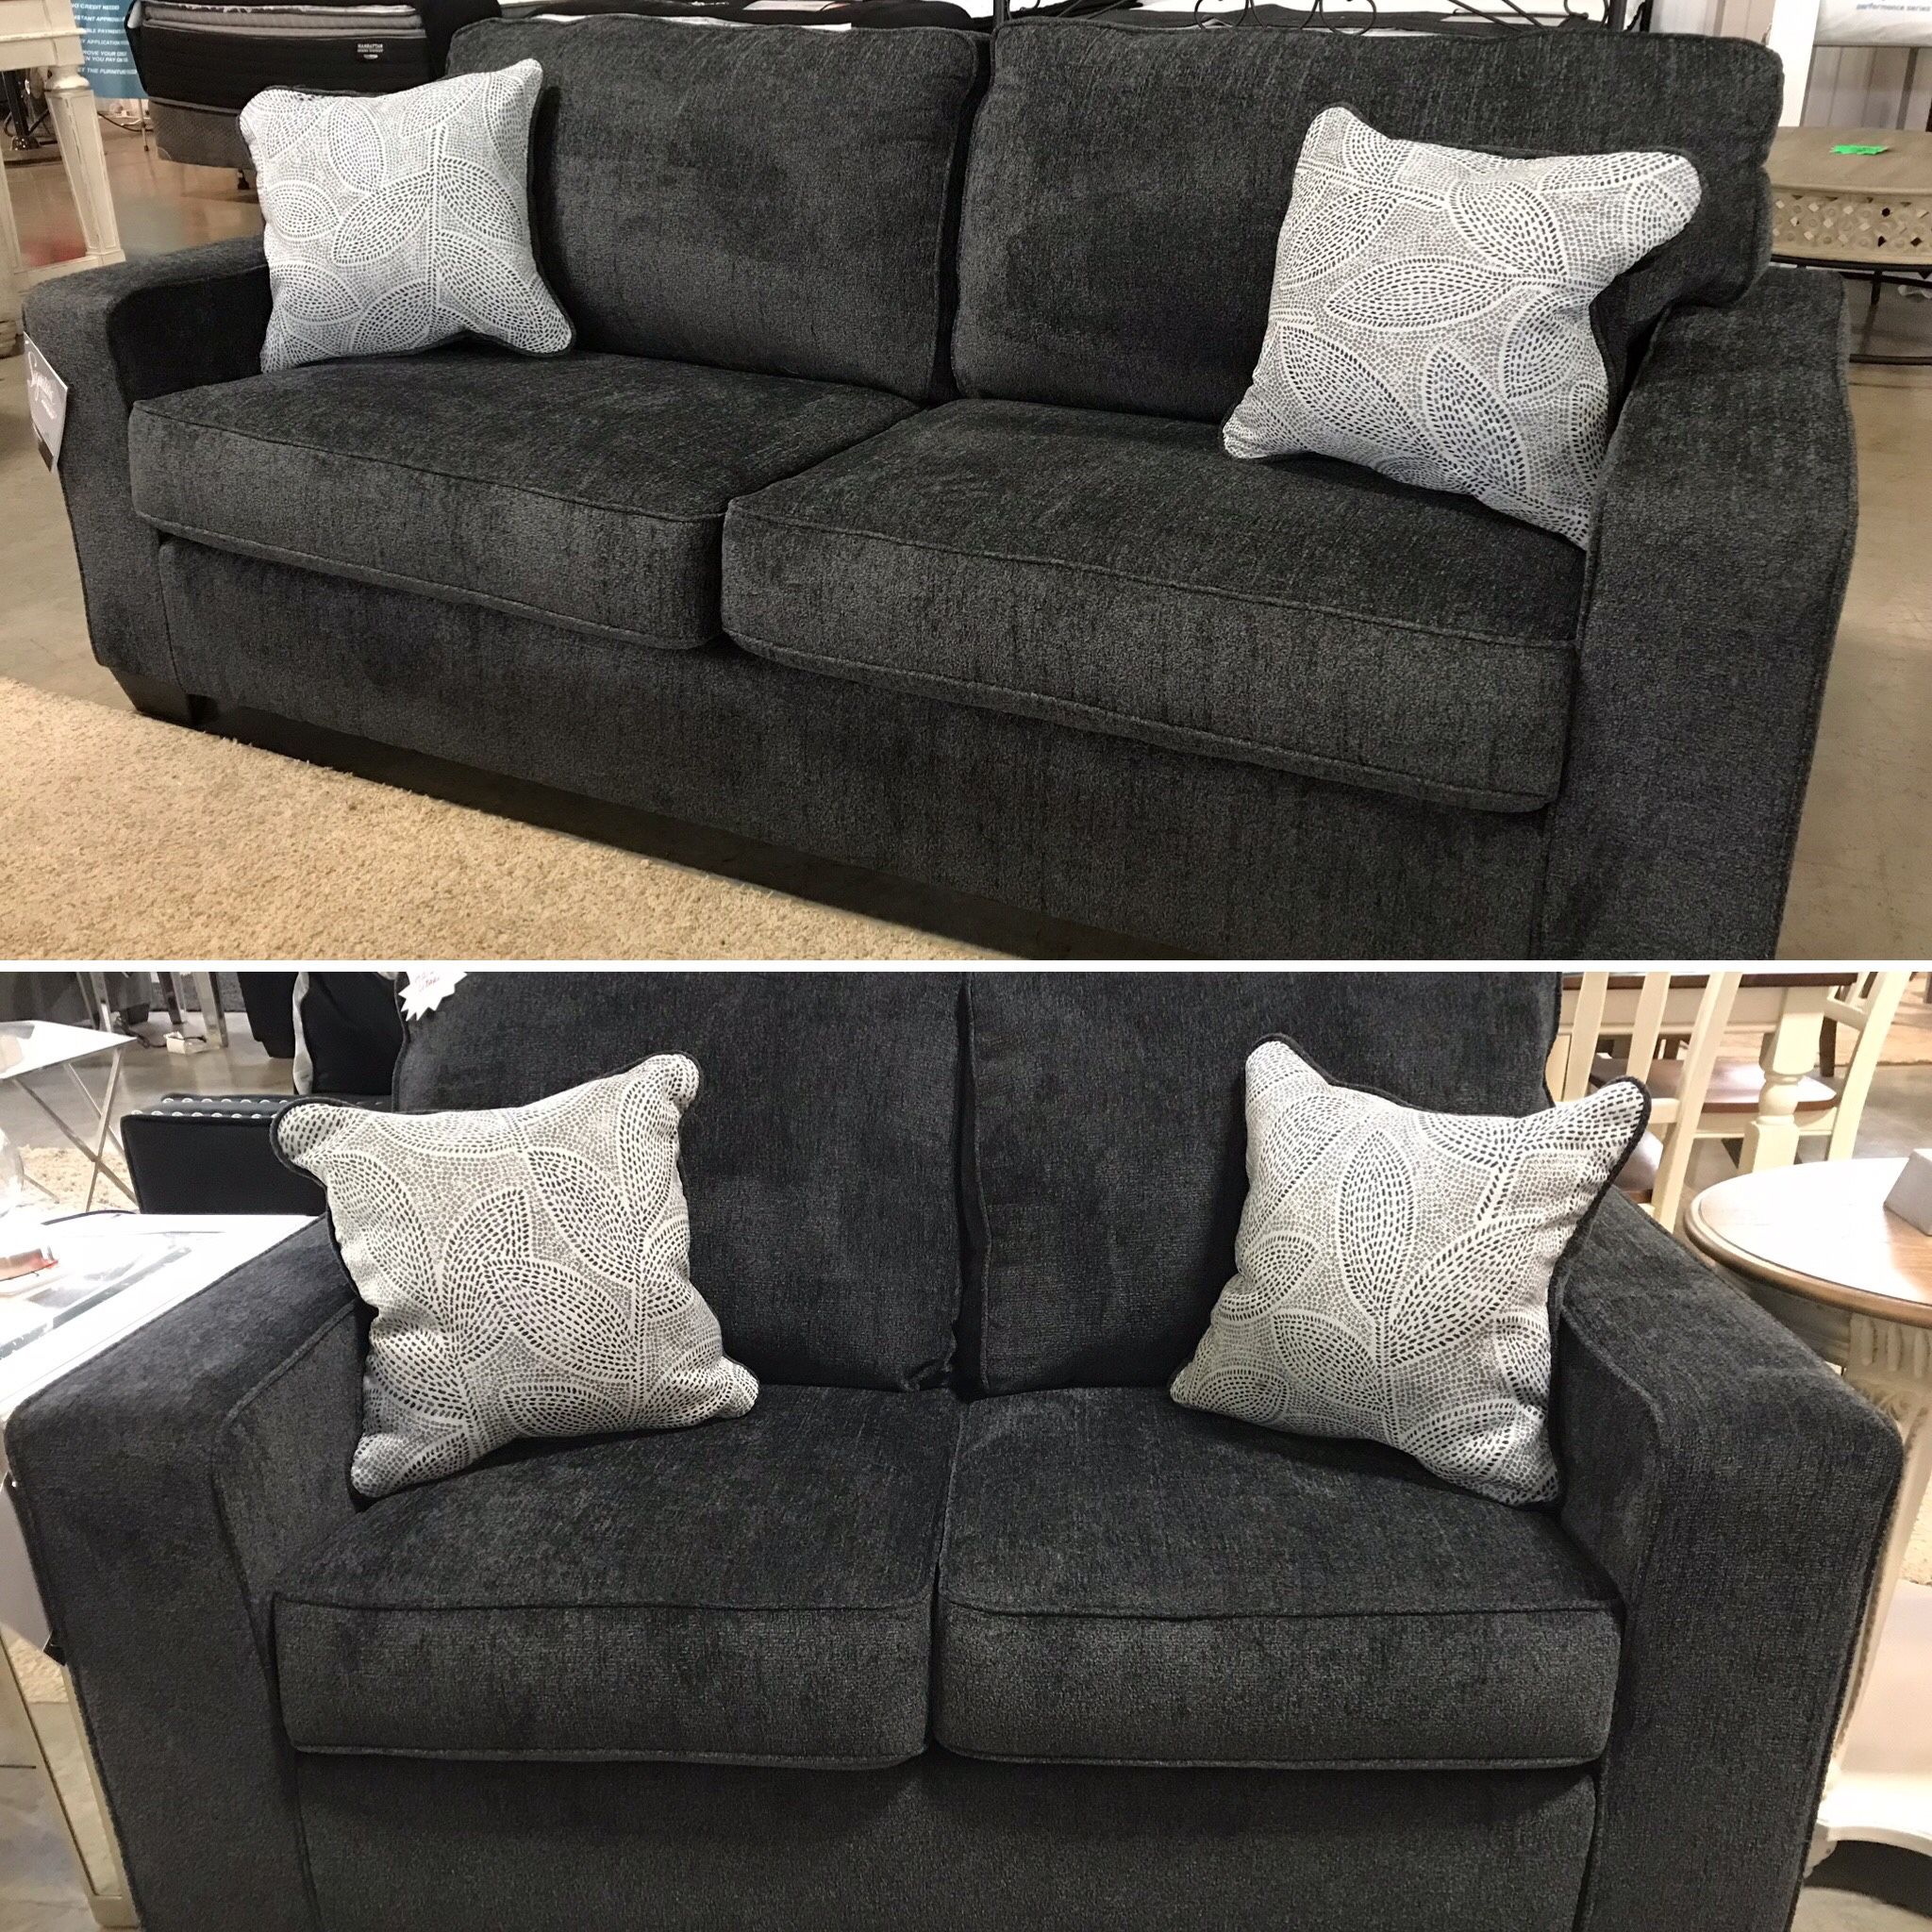 New Sofa & Loveseat! Includes Accent Pillows! $839